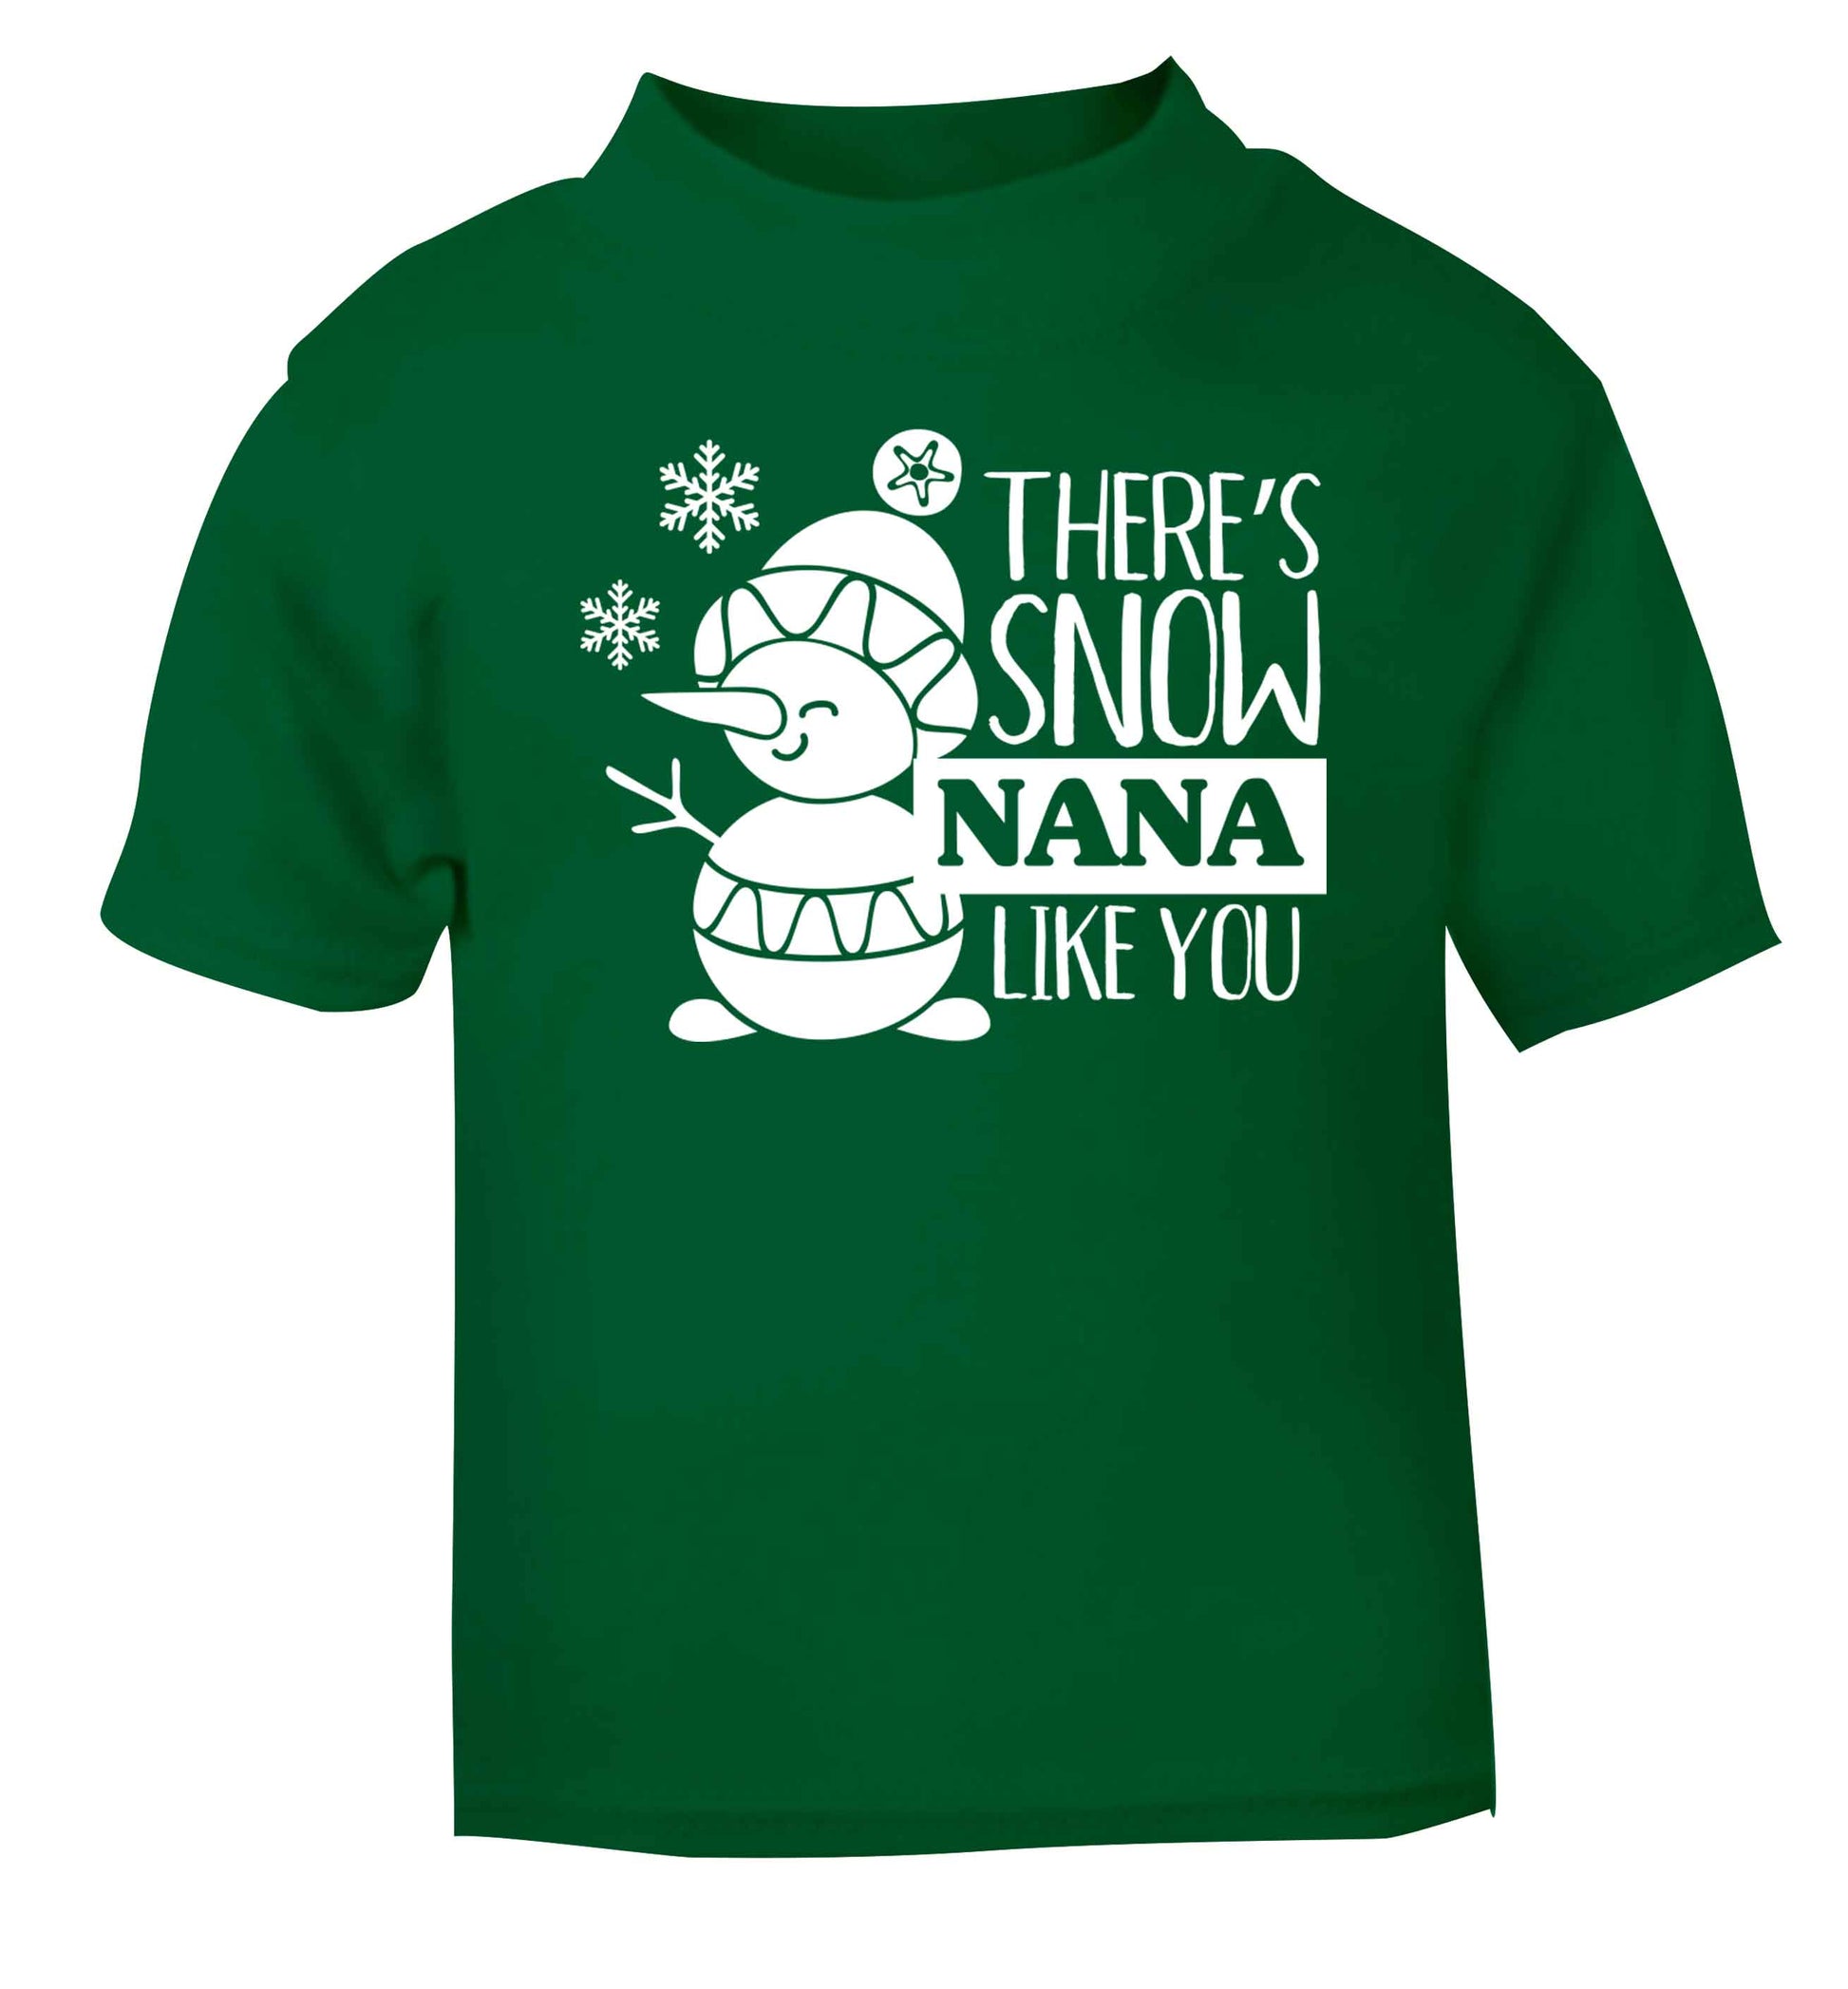 There's snow nana like you green baby toddler Tshirt 2 Years